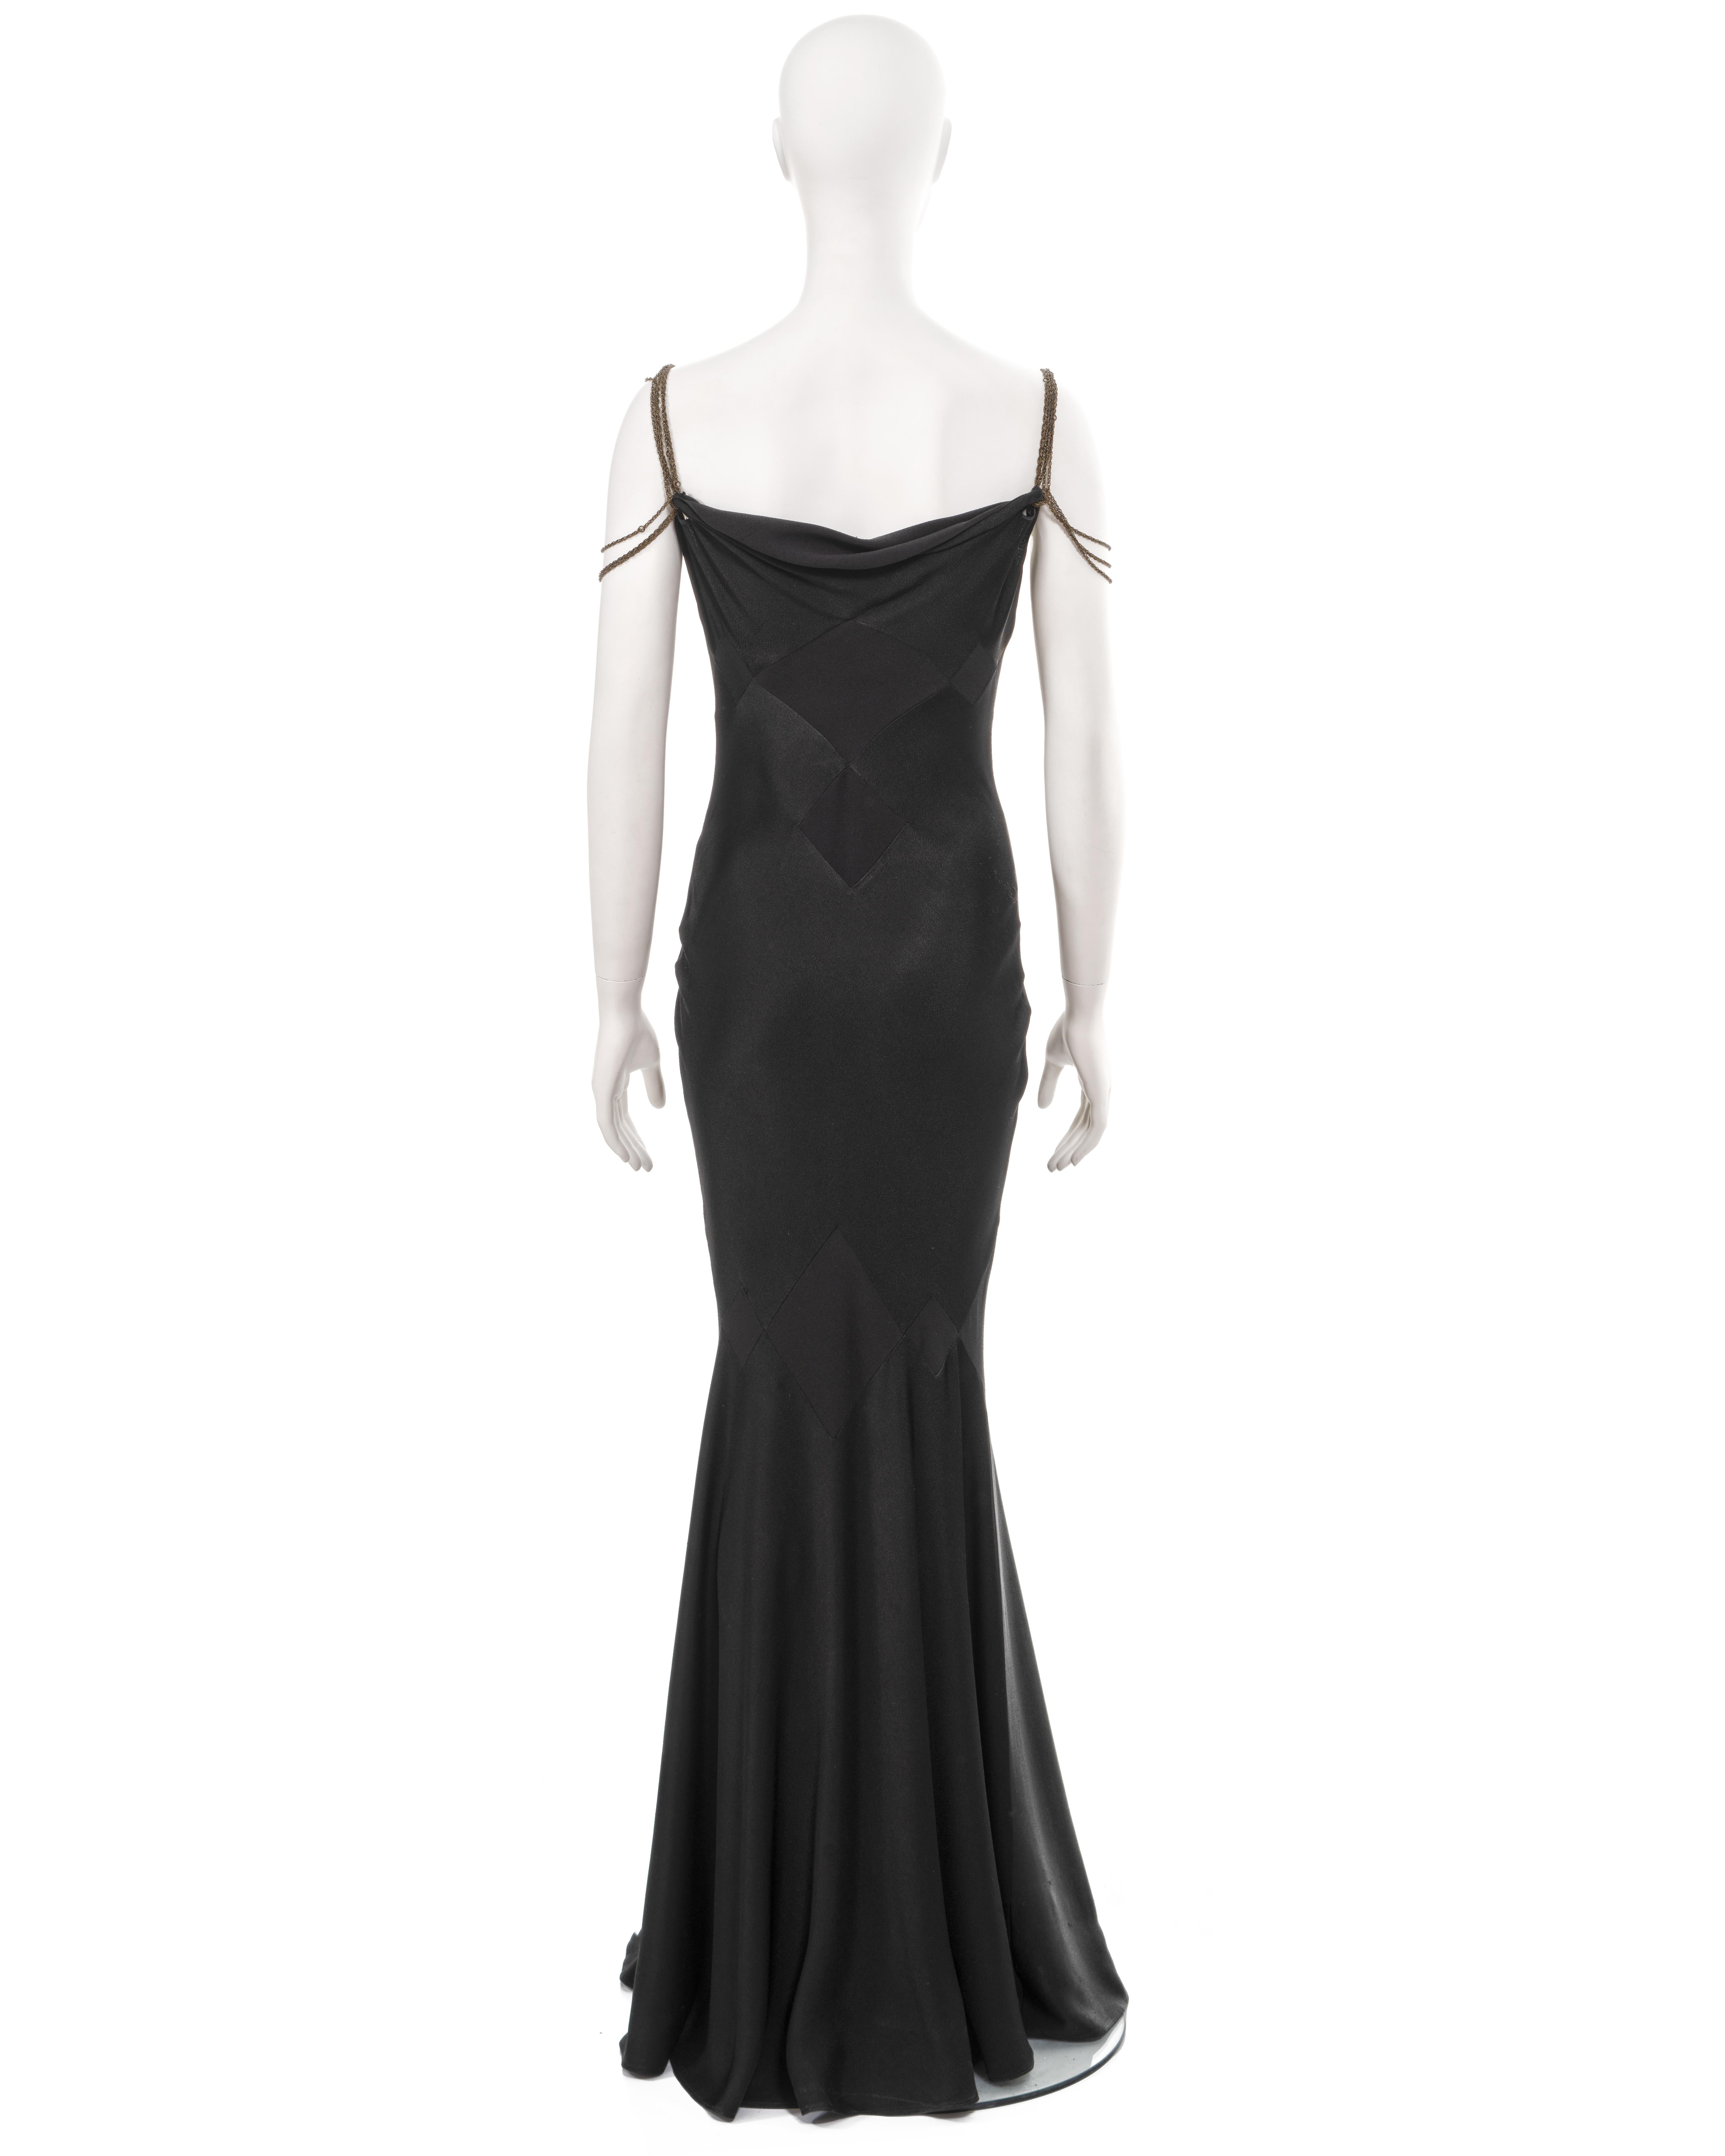 John Galliano black bias-cut satin evening dress with chain straps, ss 2002 For Sale 6